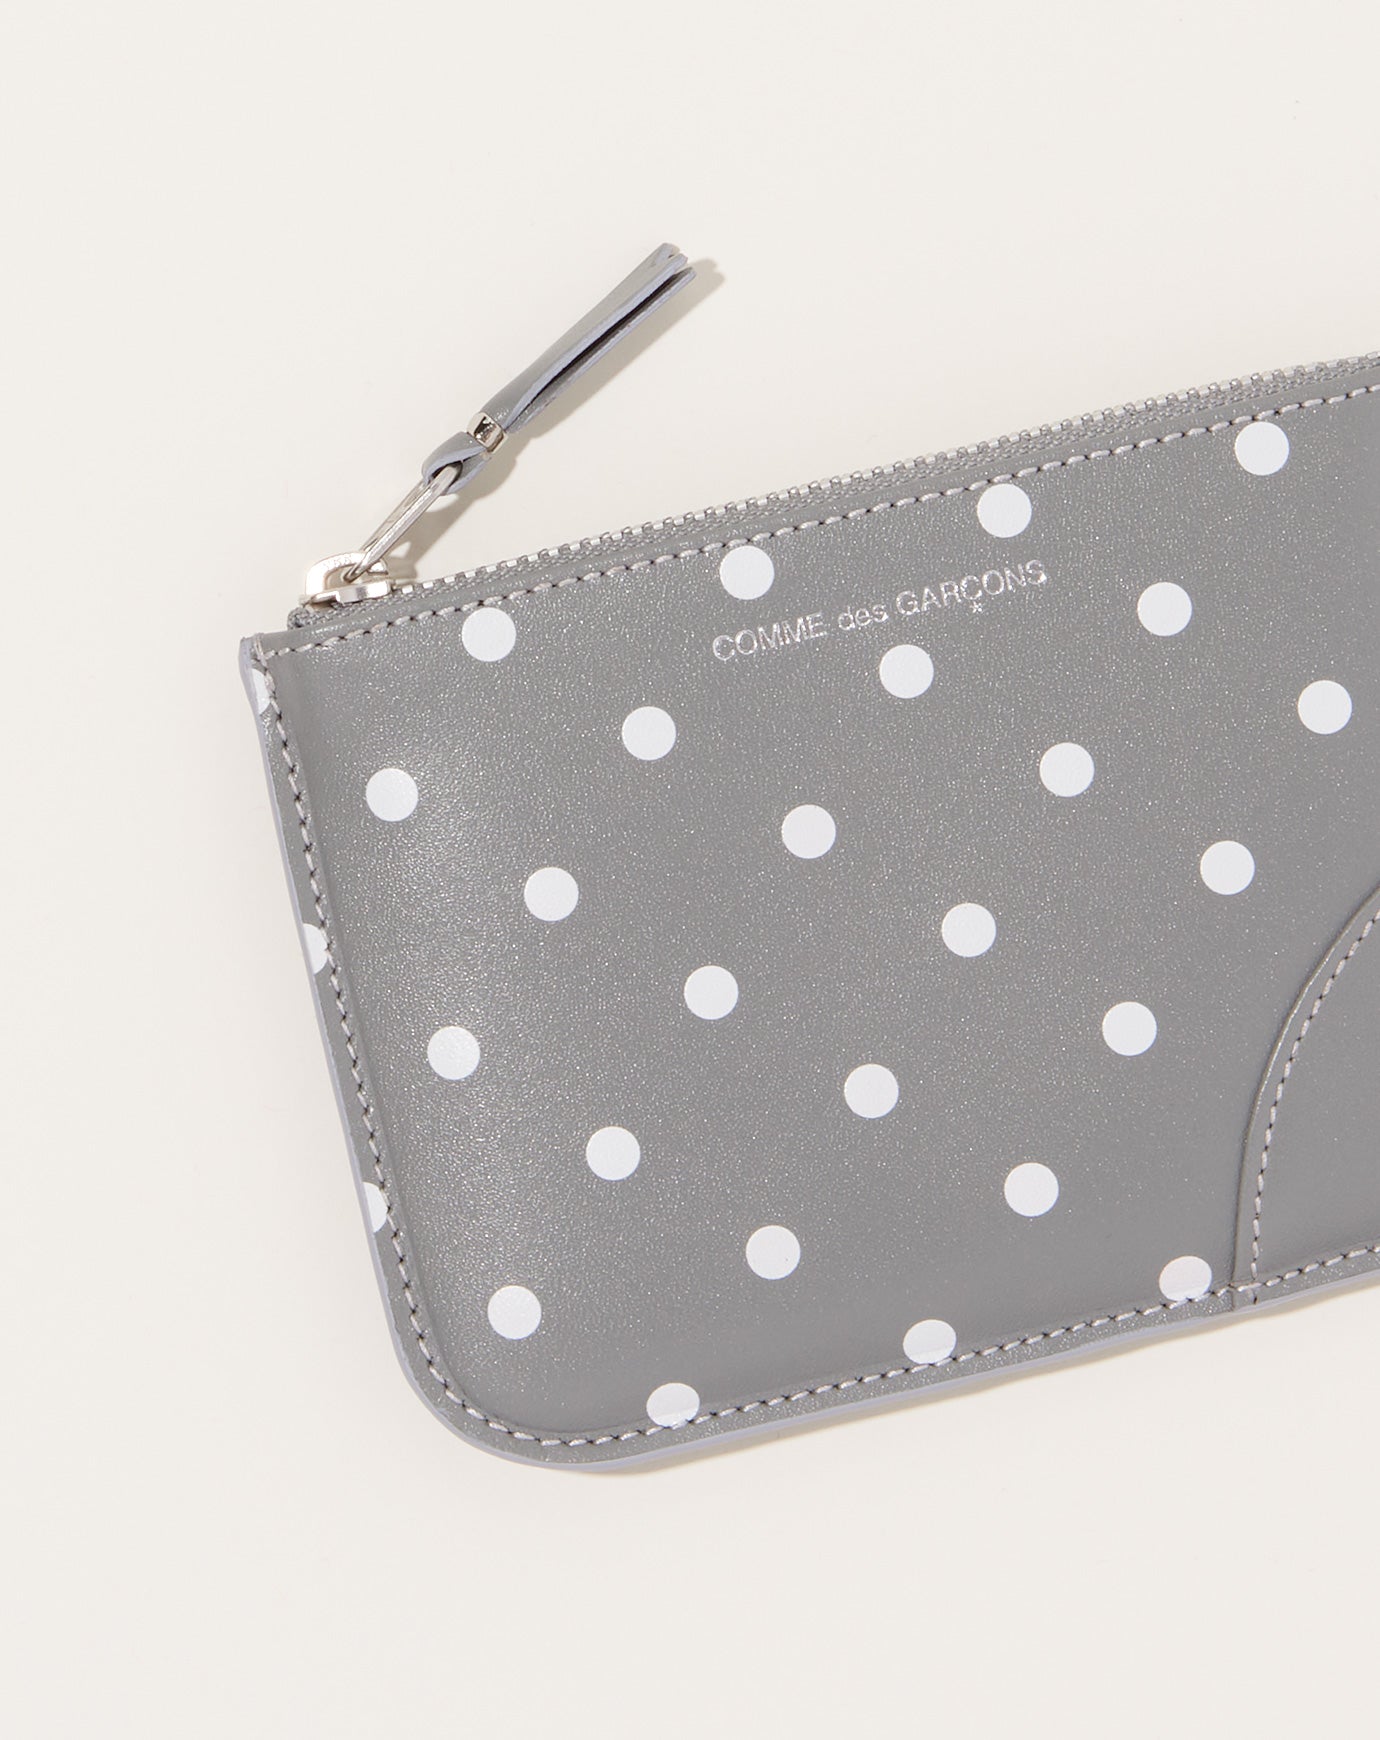 Comme des Garçons  Polka Dots Printed Pouch in Grey